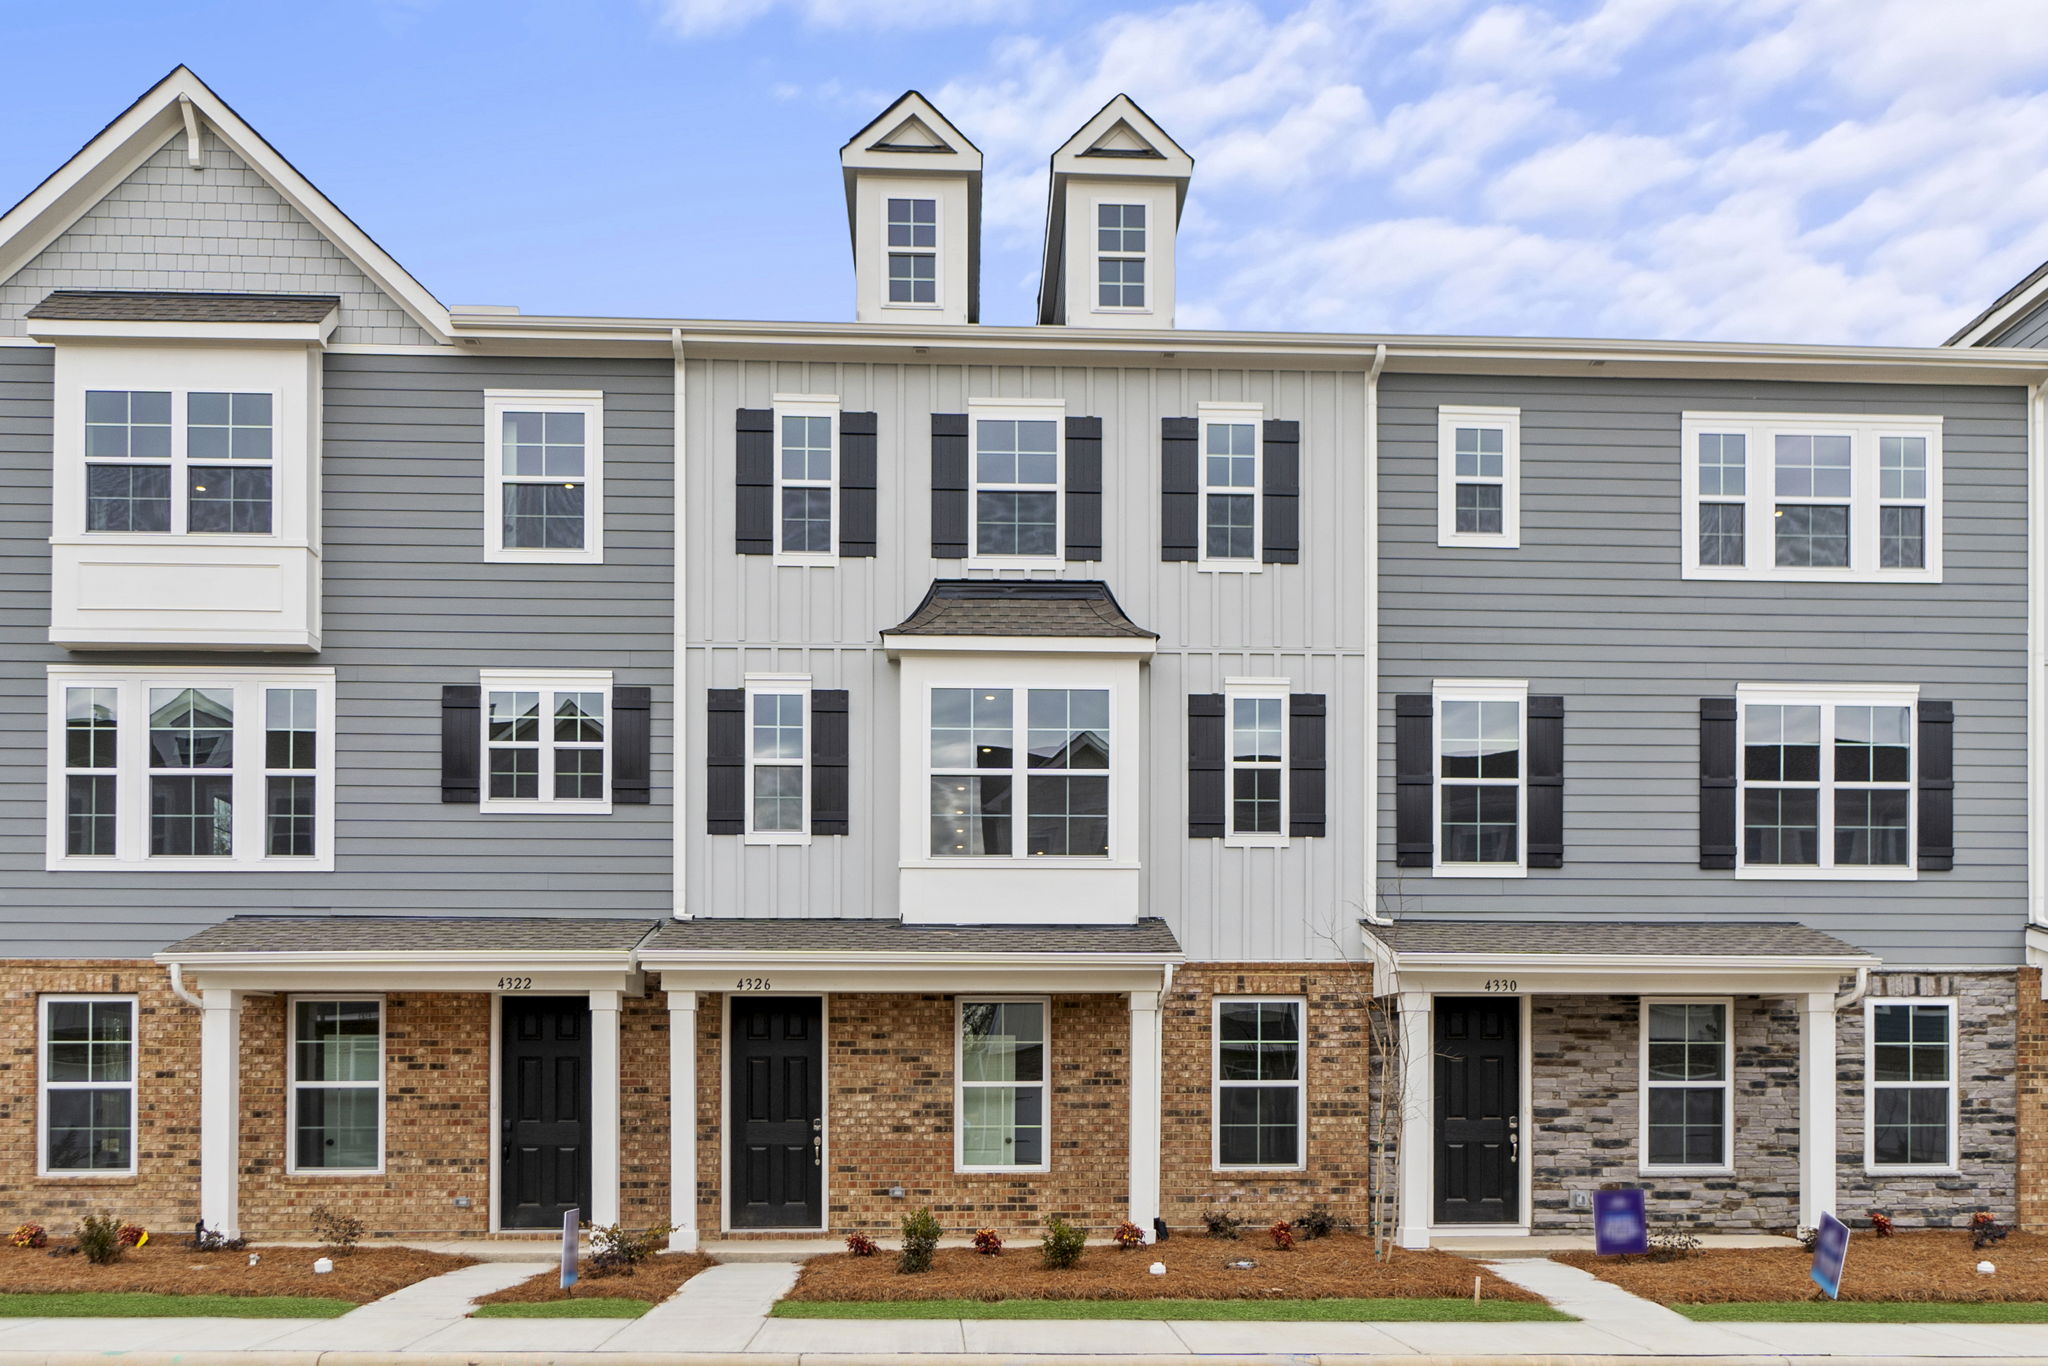 0047 4326 Reed Creek Drive | Alley Load Townhomes at Townhomes at ...